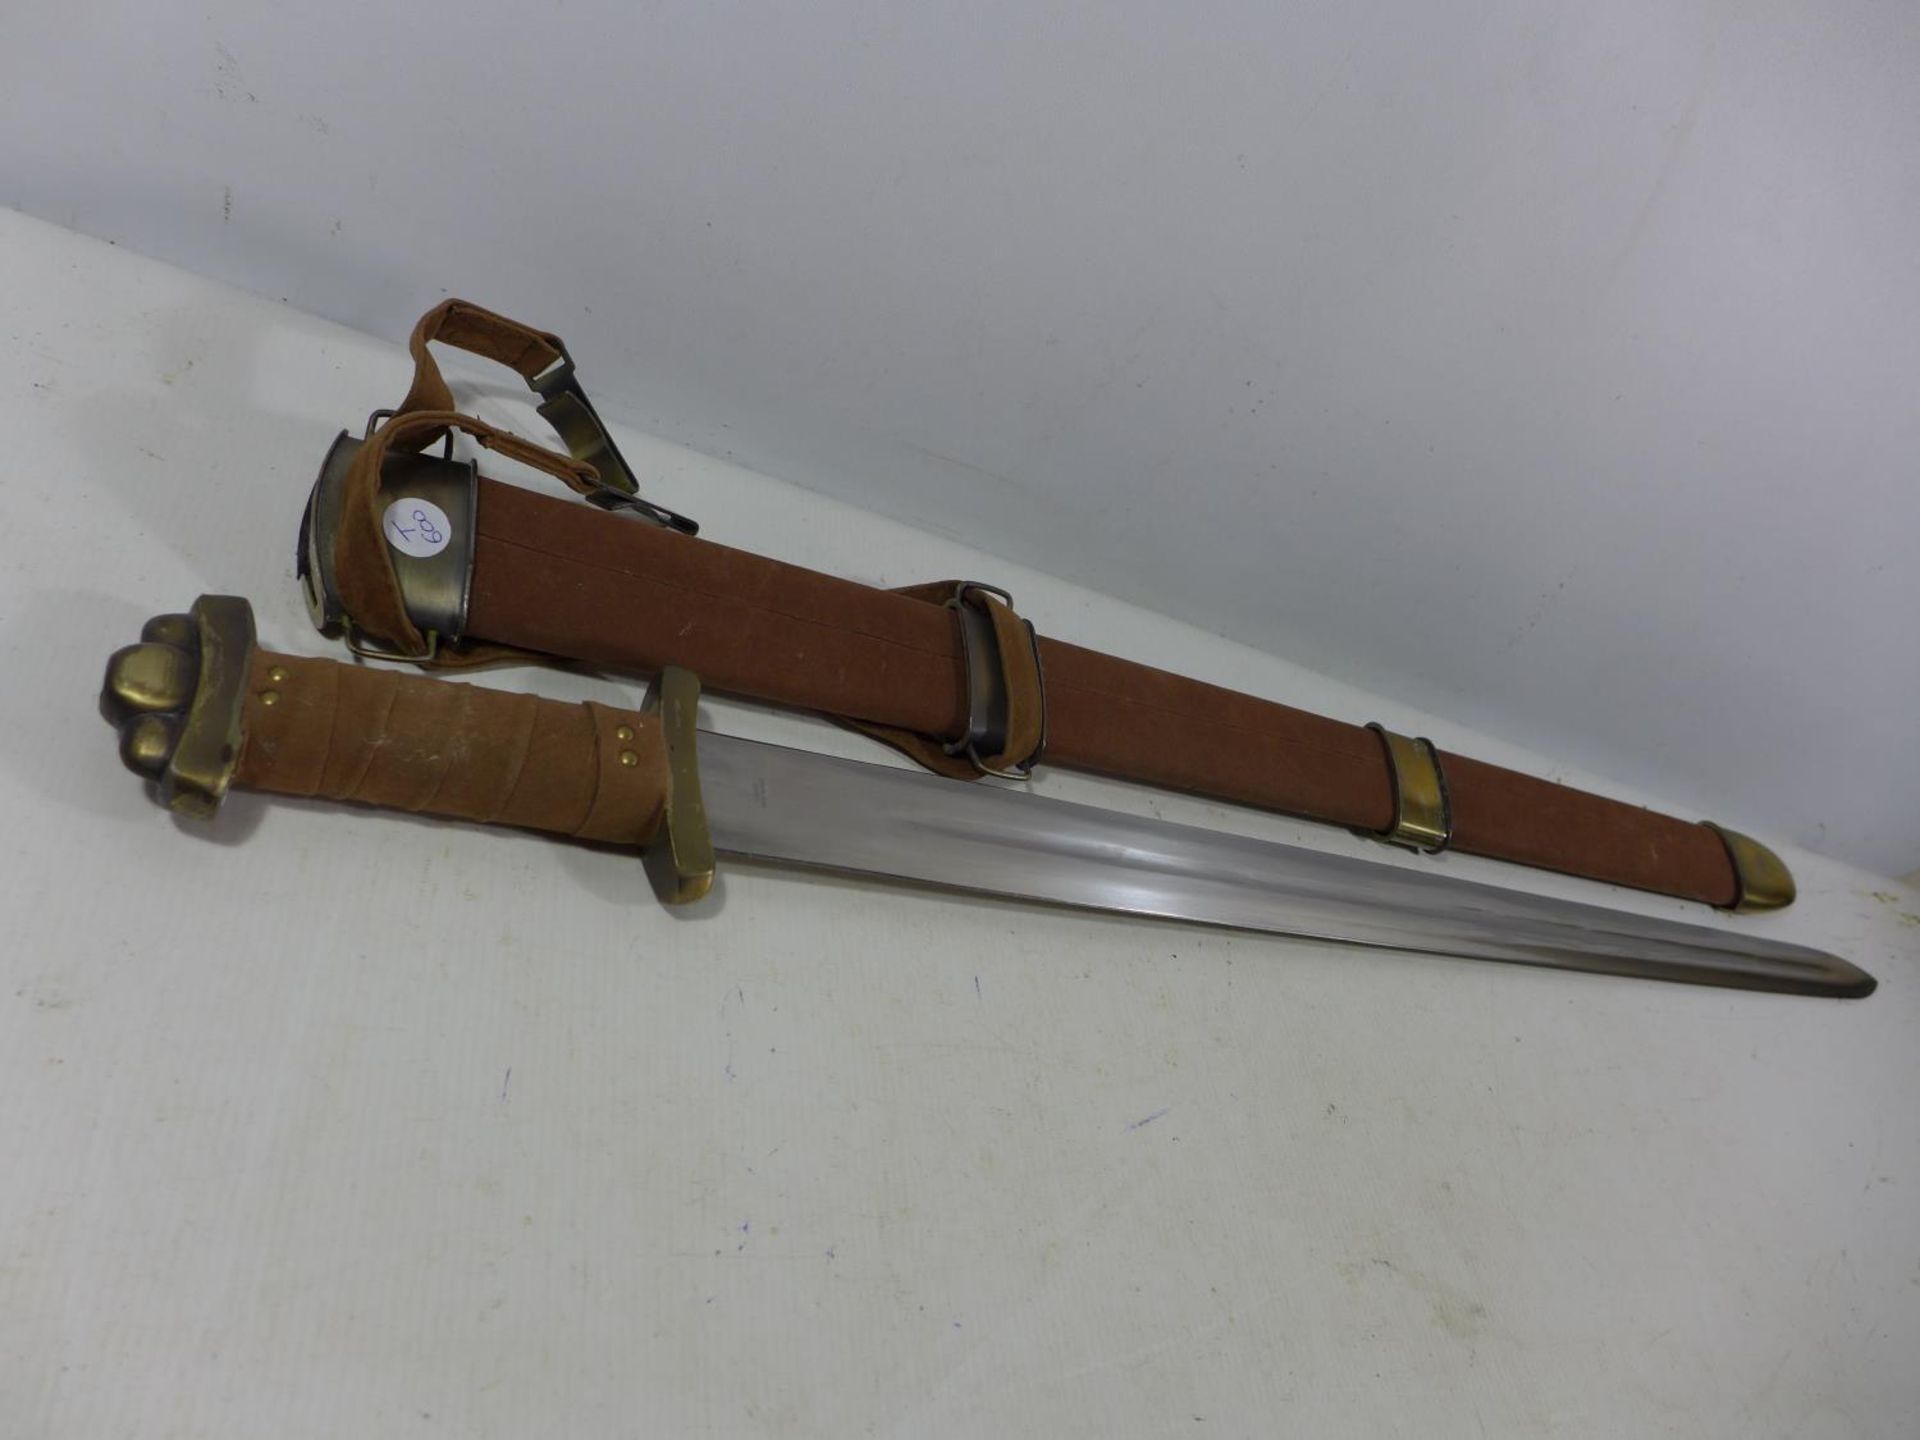 A GOOD QUALITY MODERN DISPLAY VIKING SWORD AND SCABBARD, 73CM BLADE, LENGTH 94CM - Image 3 of 4